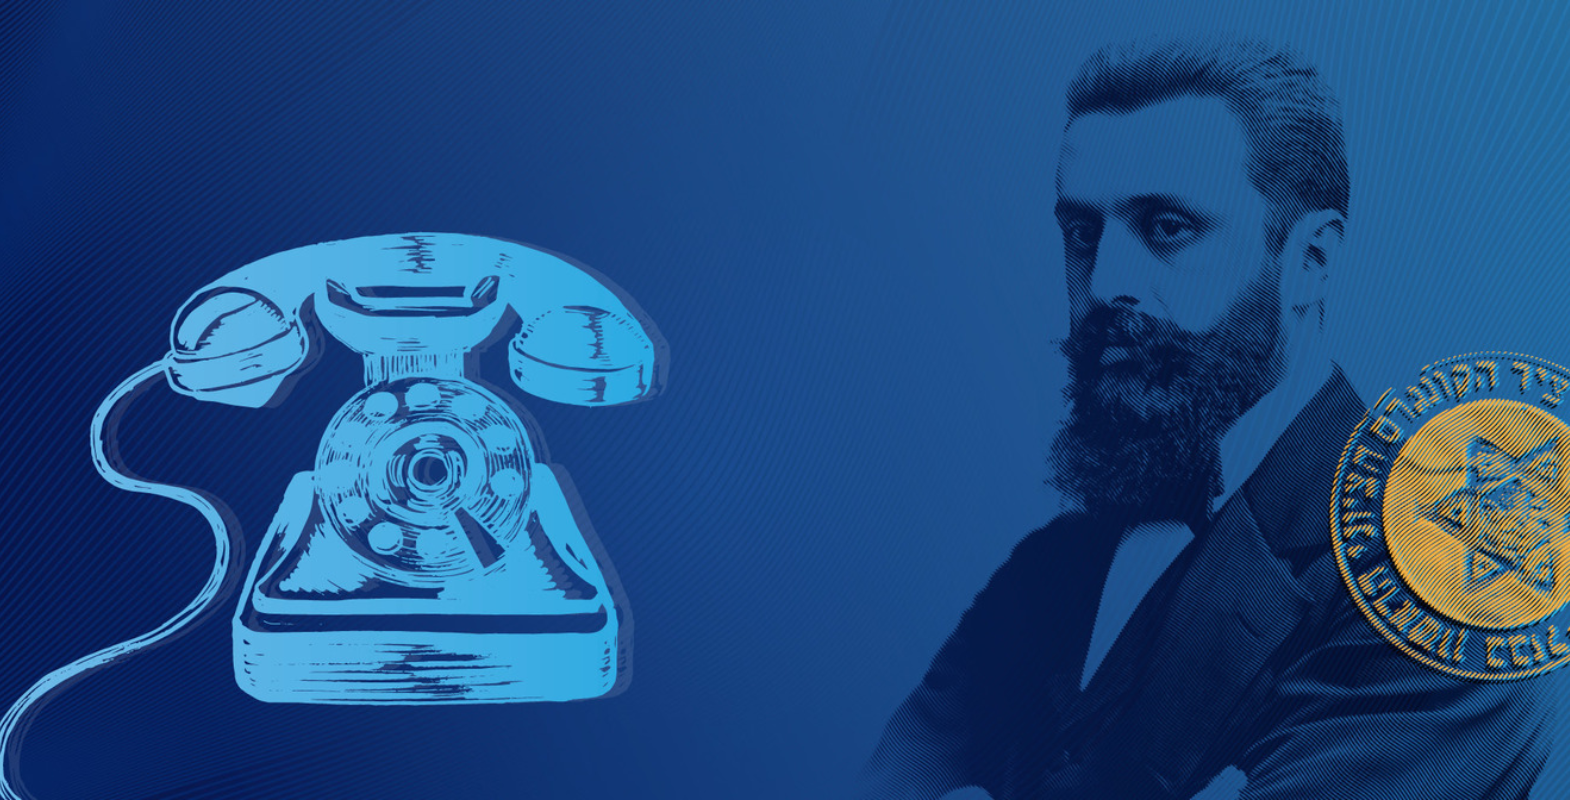 Herzl and Phone